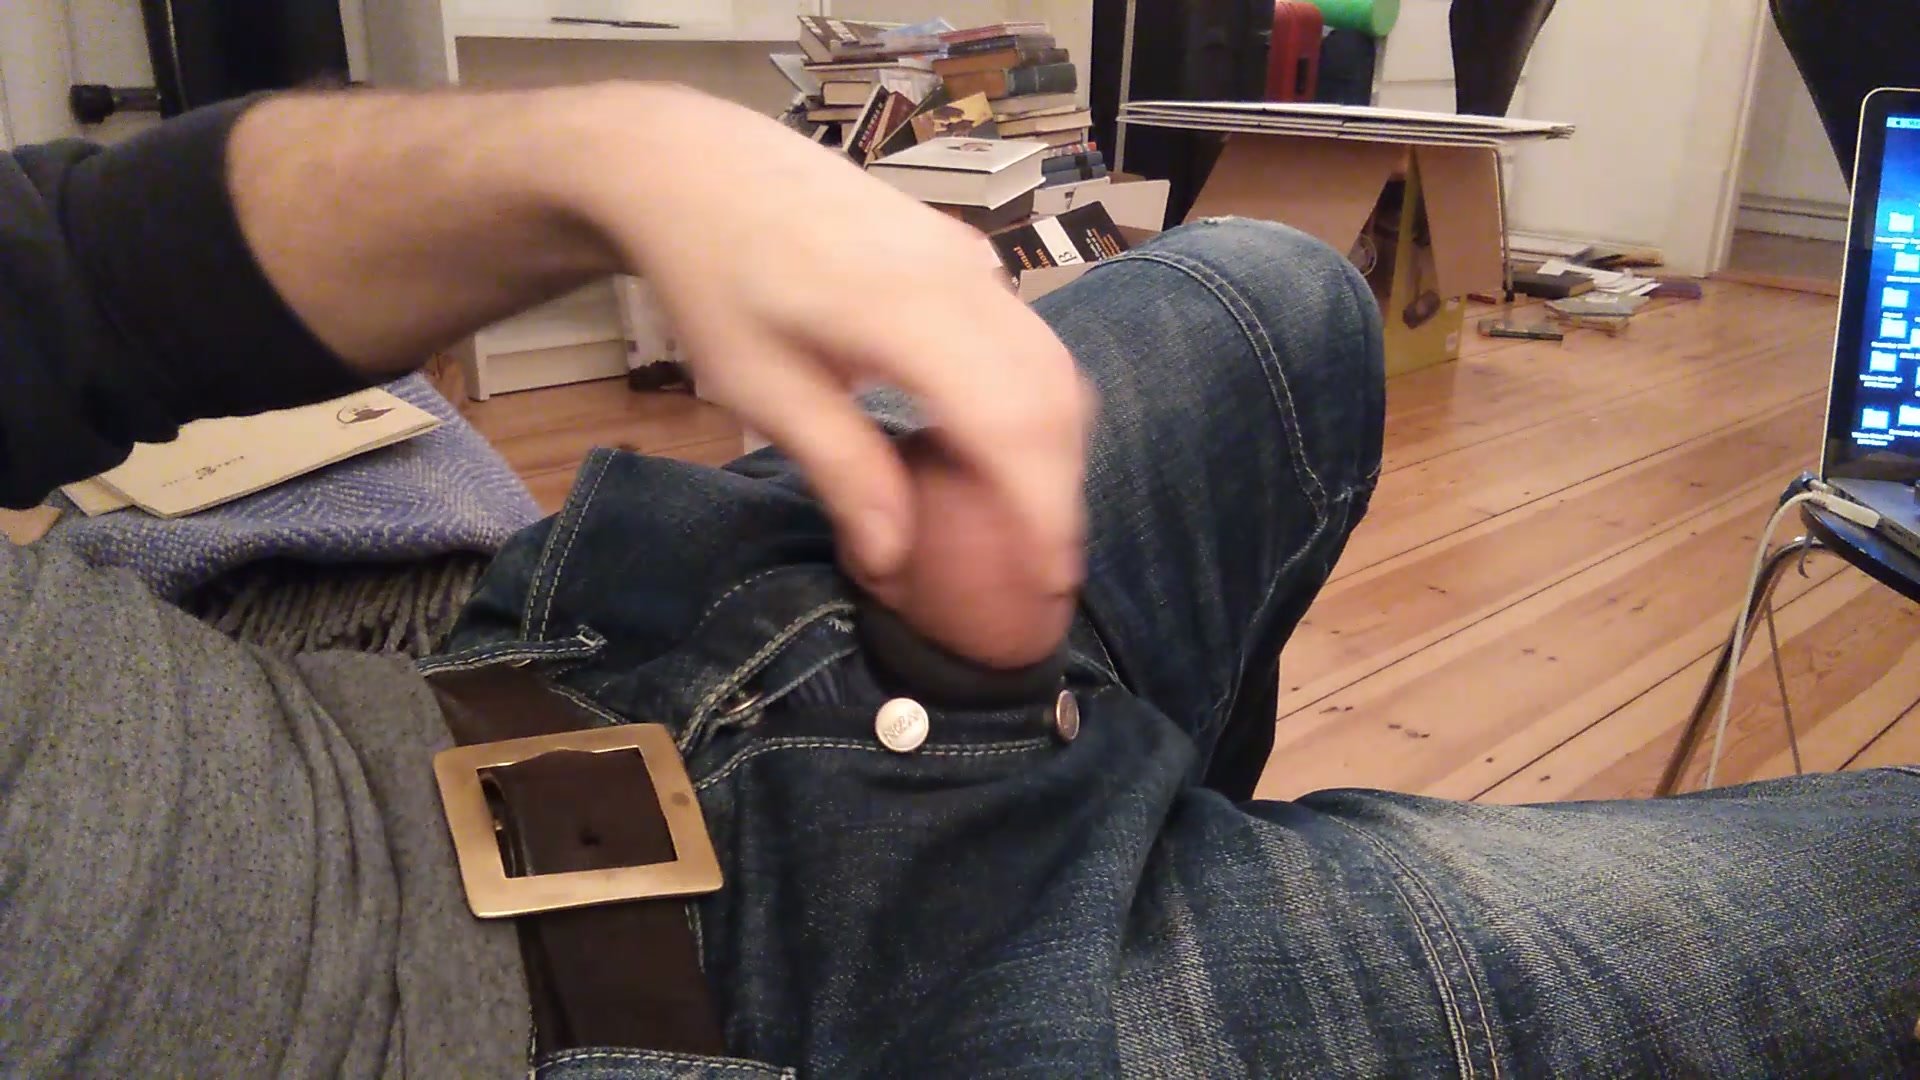 I annoy my balls by pulling them out of jeans